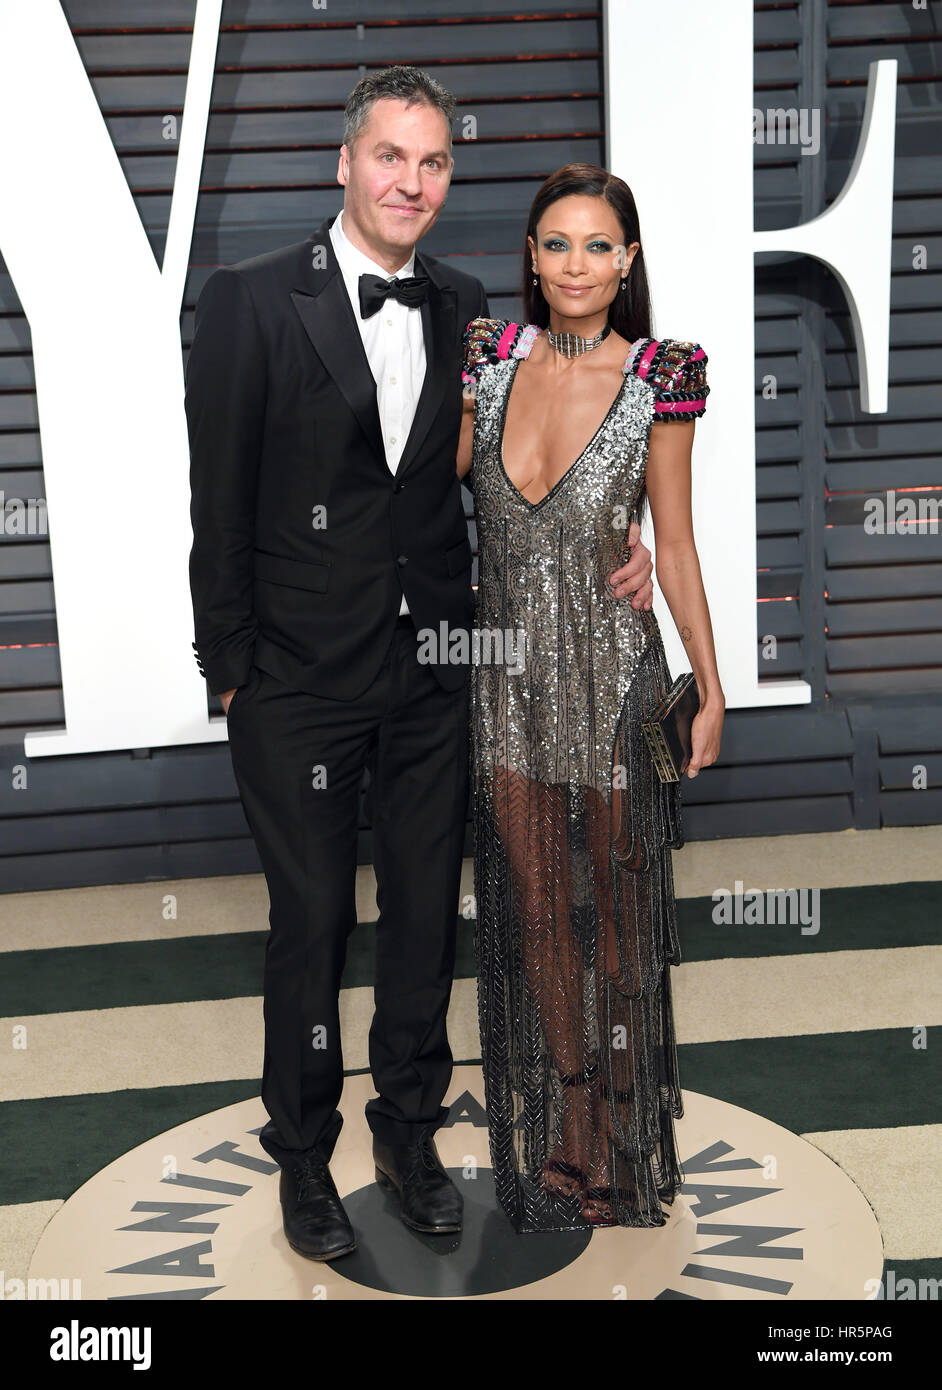 Thandie Newton and Ol Parker arriving at the Vanity Fair Oscar Party in Beverly Hills, Los Angeles, USA. Stock Photo